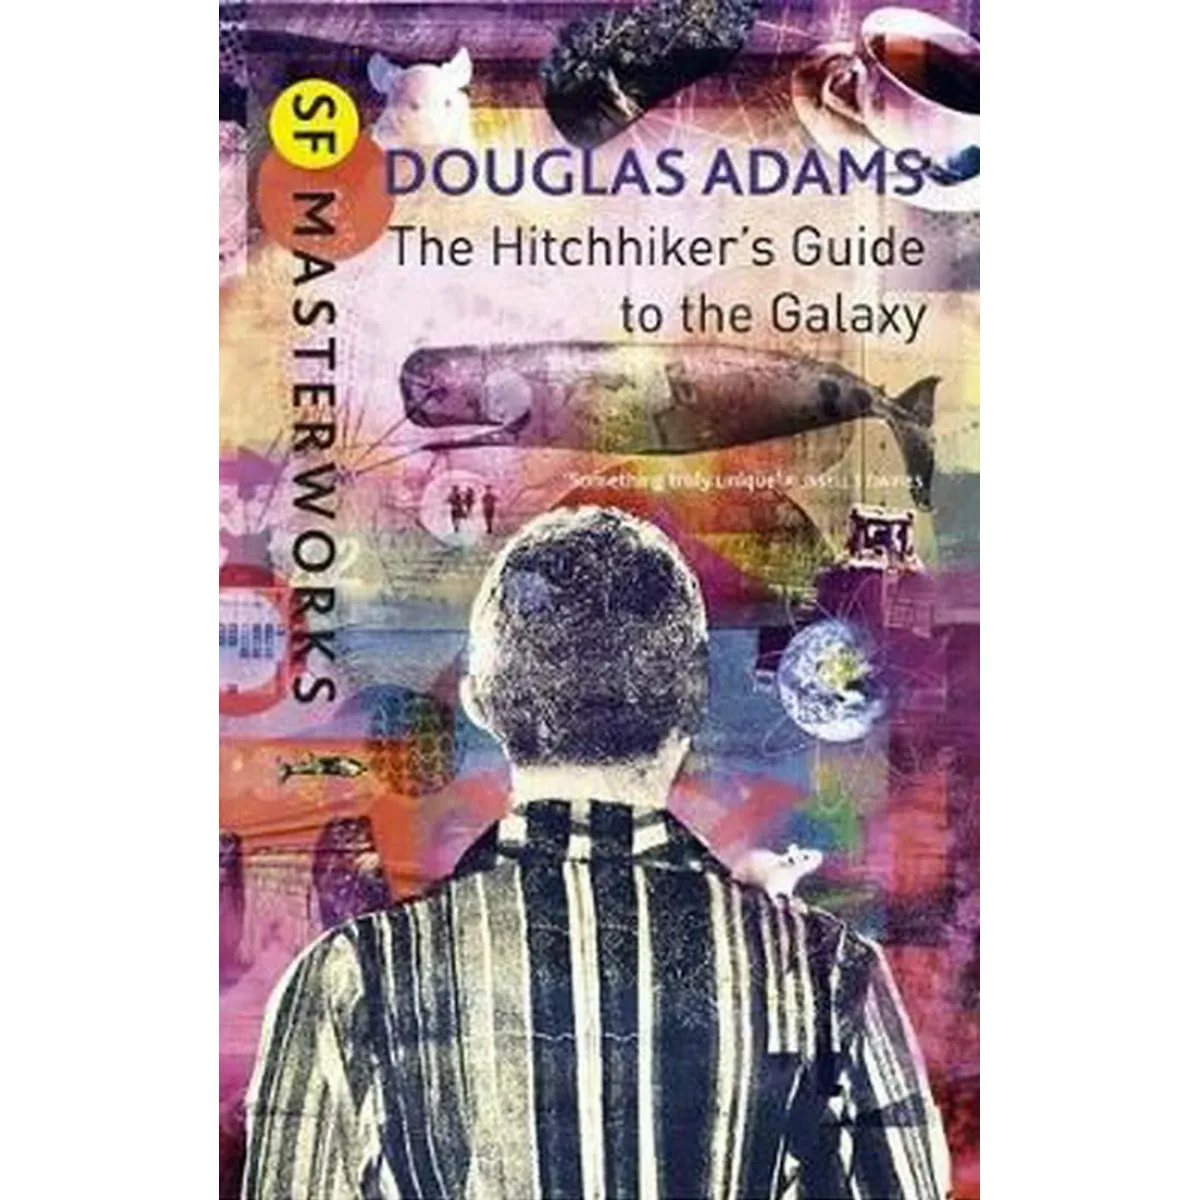 The Hitchhiker's Guide to the Galaxy (Hitchhiker's Guide Series #1) by  Douglas Adams, Paperback